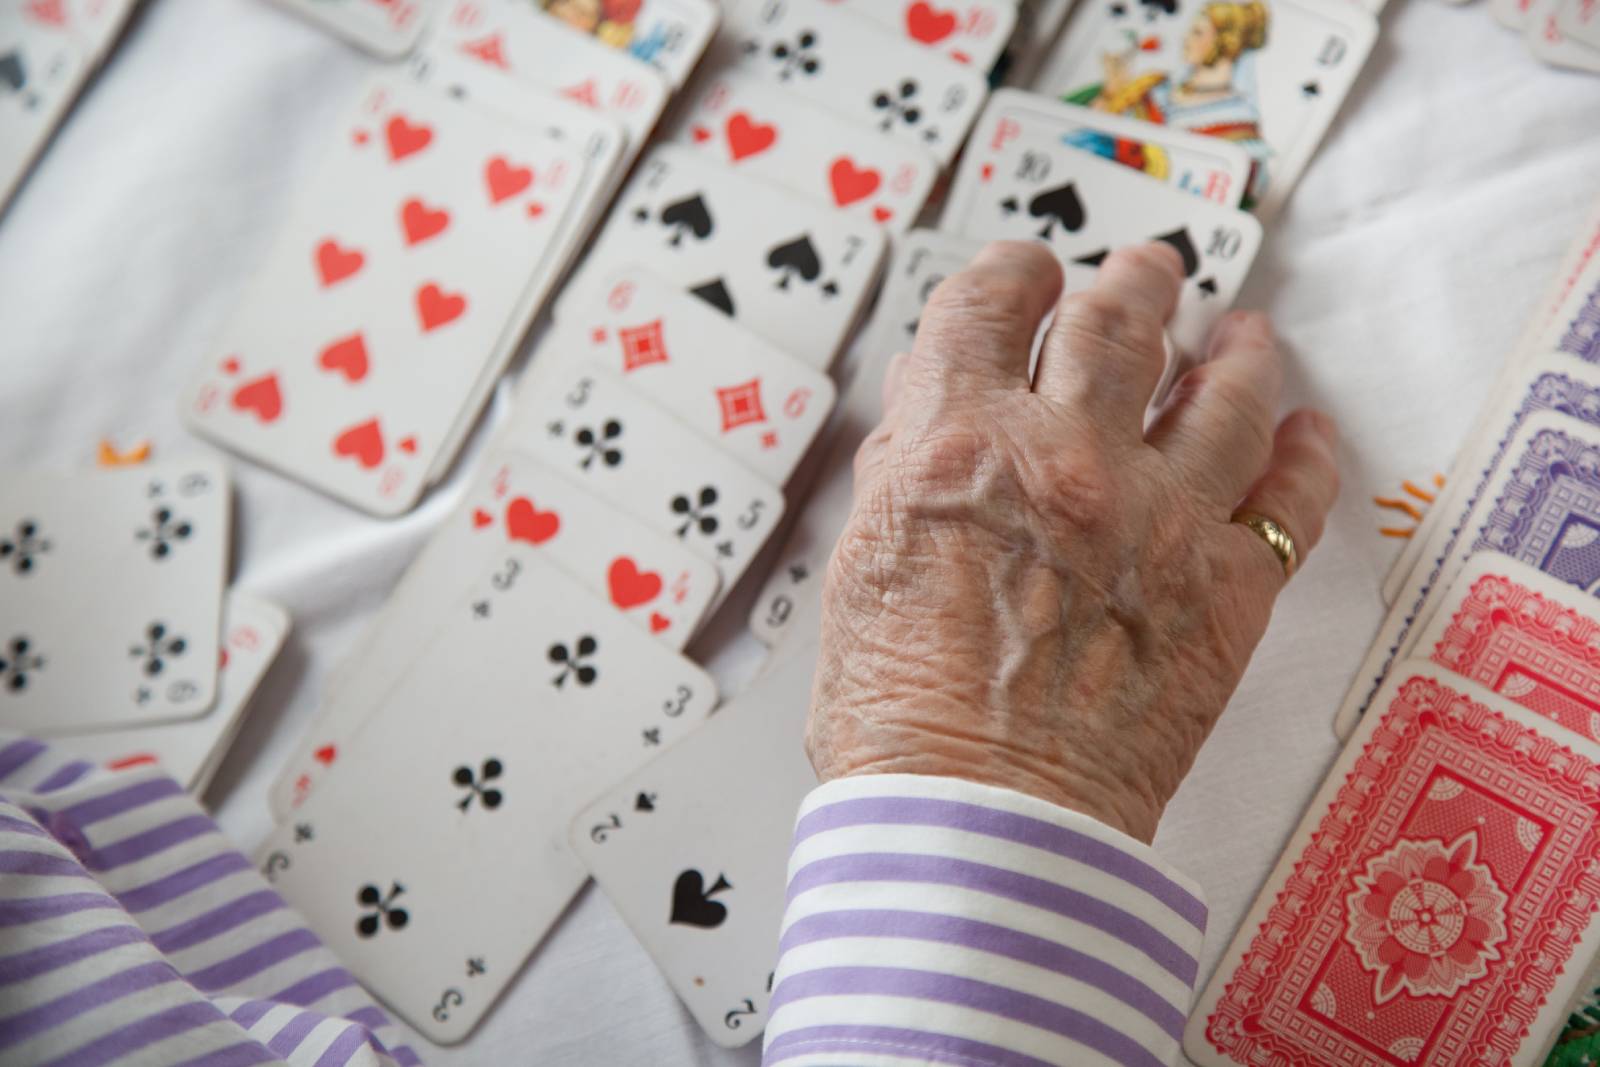 Elderly woman with dementia playing cards.